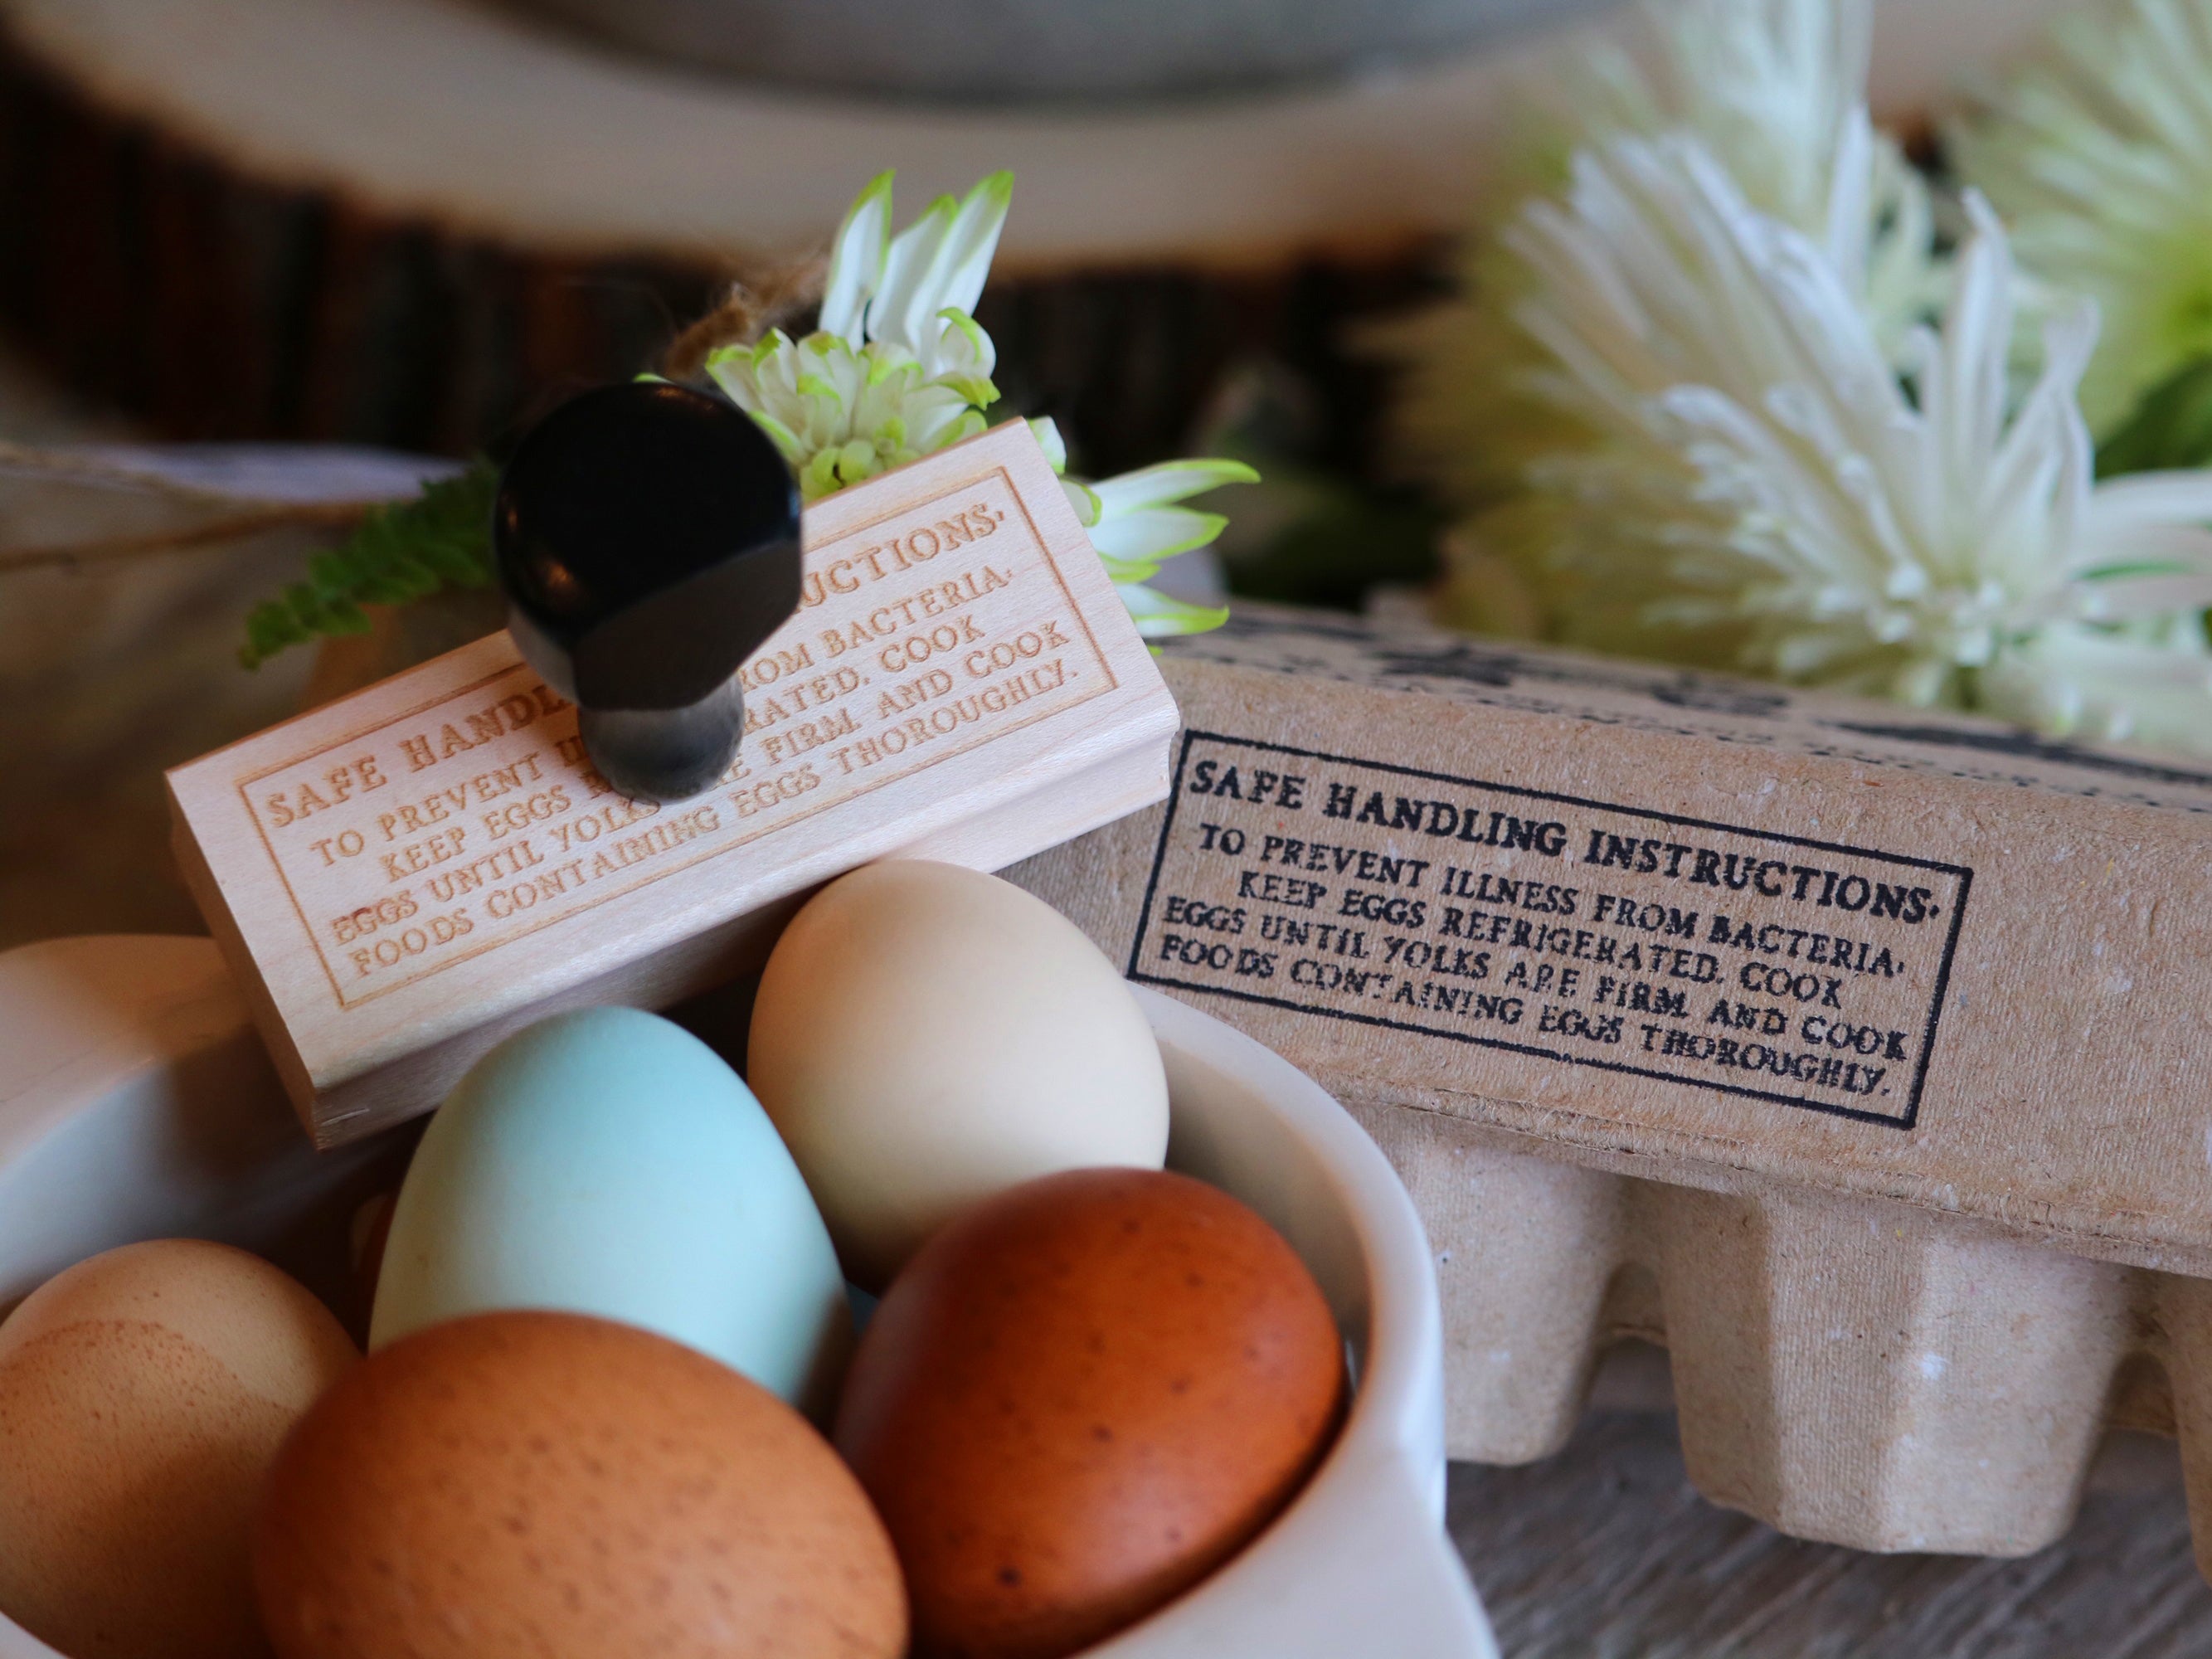 Chicken Egg Carton Stamp with Herbs Rubber Stamp